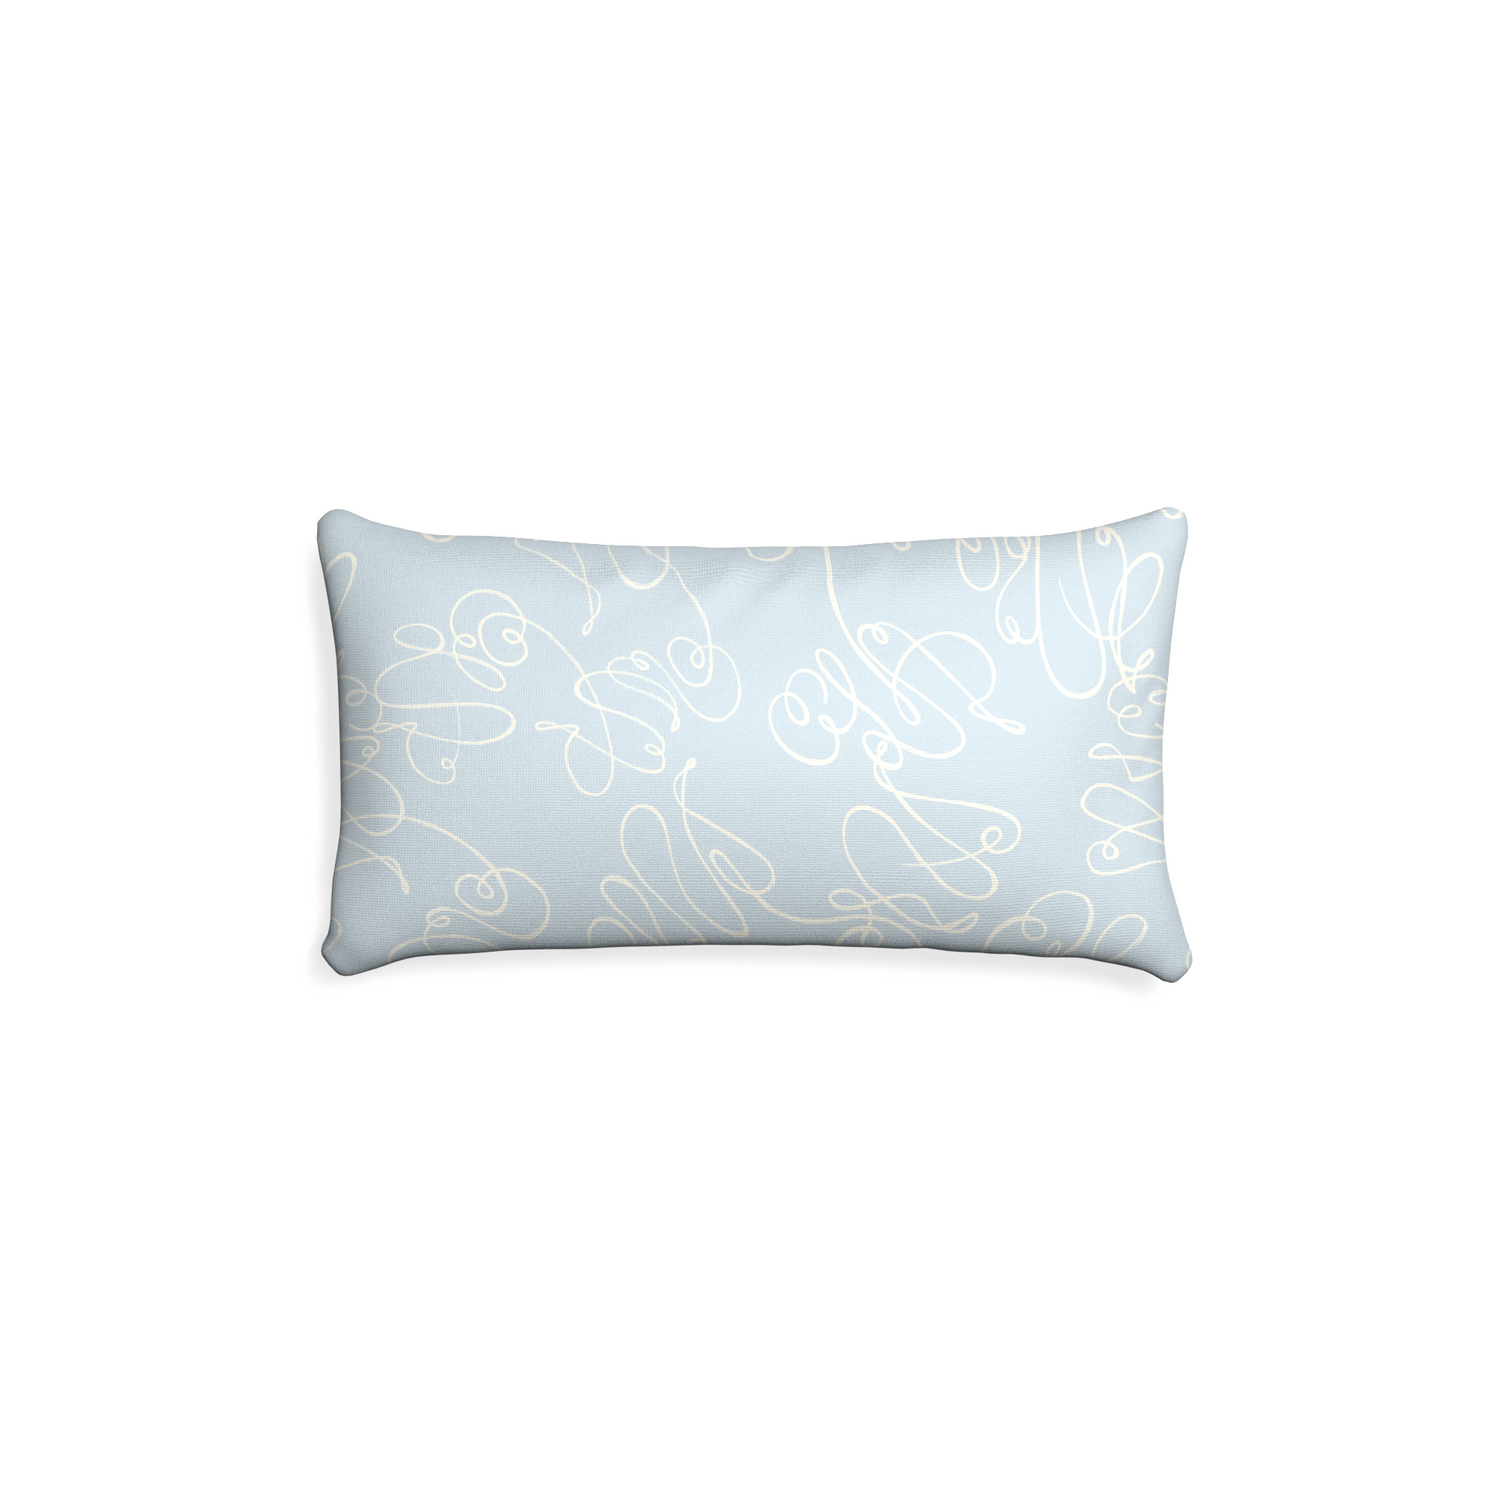 Petite-lumbar mirabella custom powder blue abstractpillow with none on white background